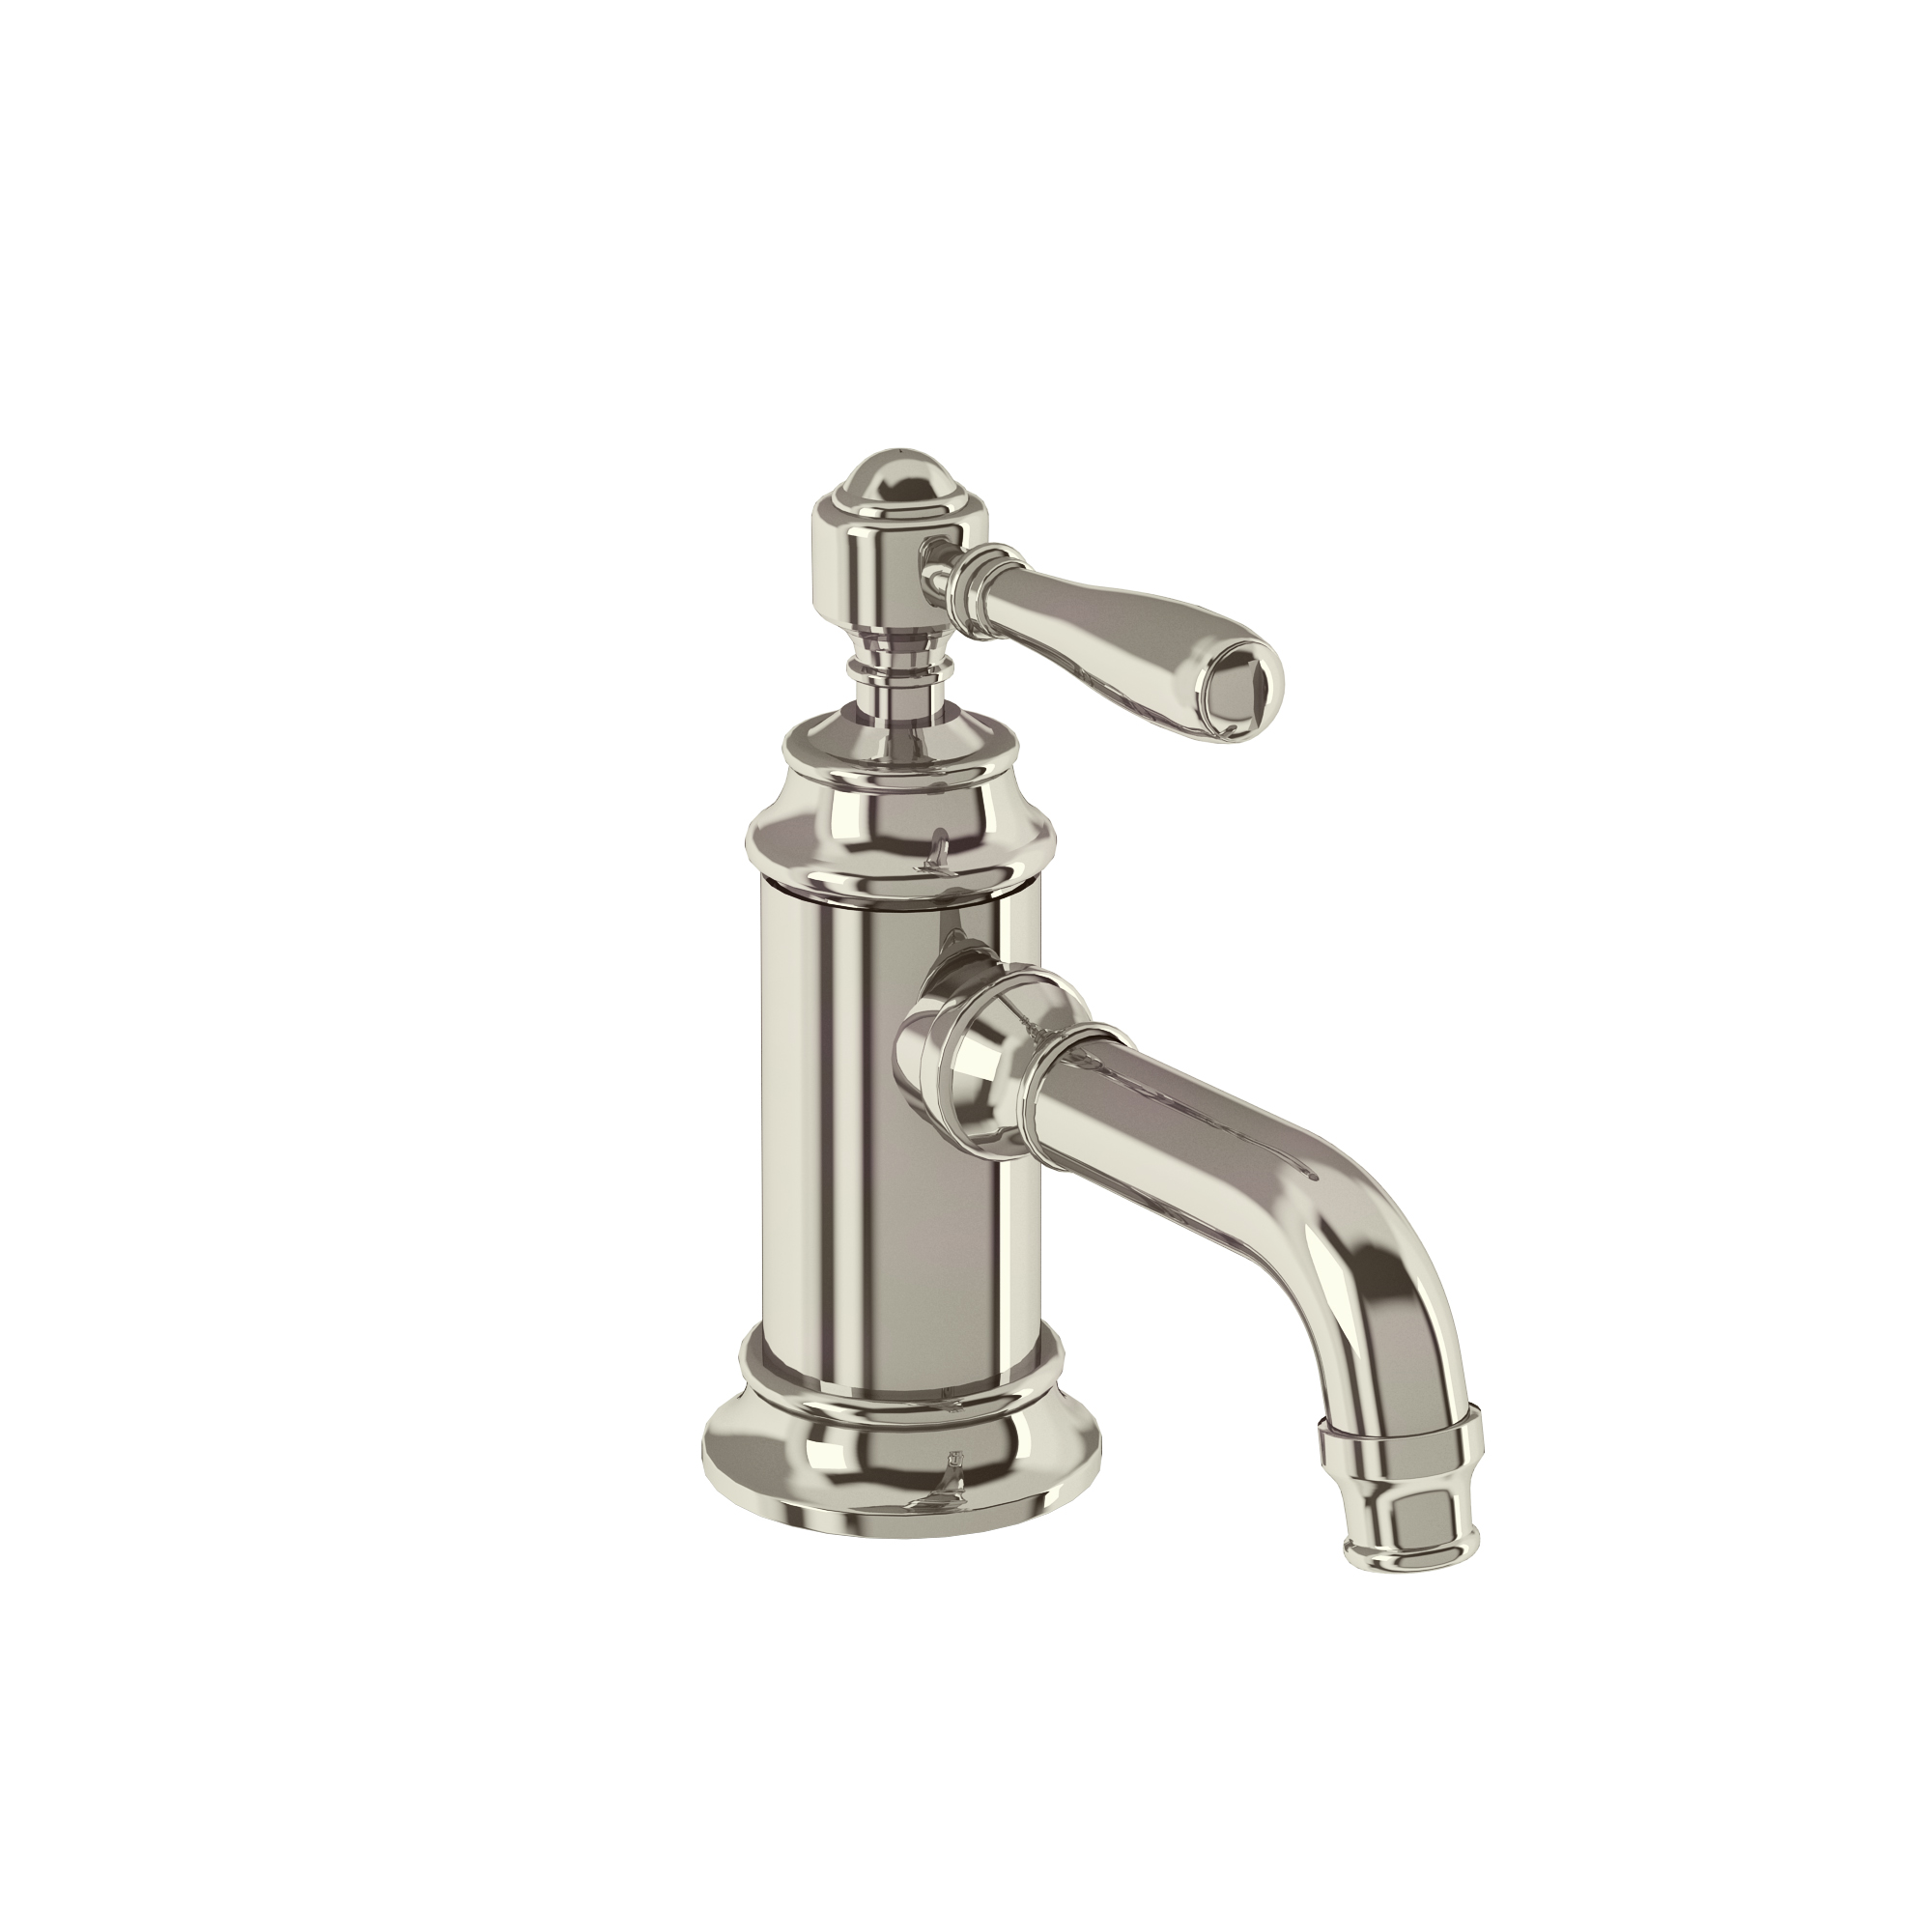 Arcade Single-lever basin mixer without pop up waste - nickel - with brass lever